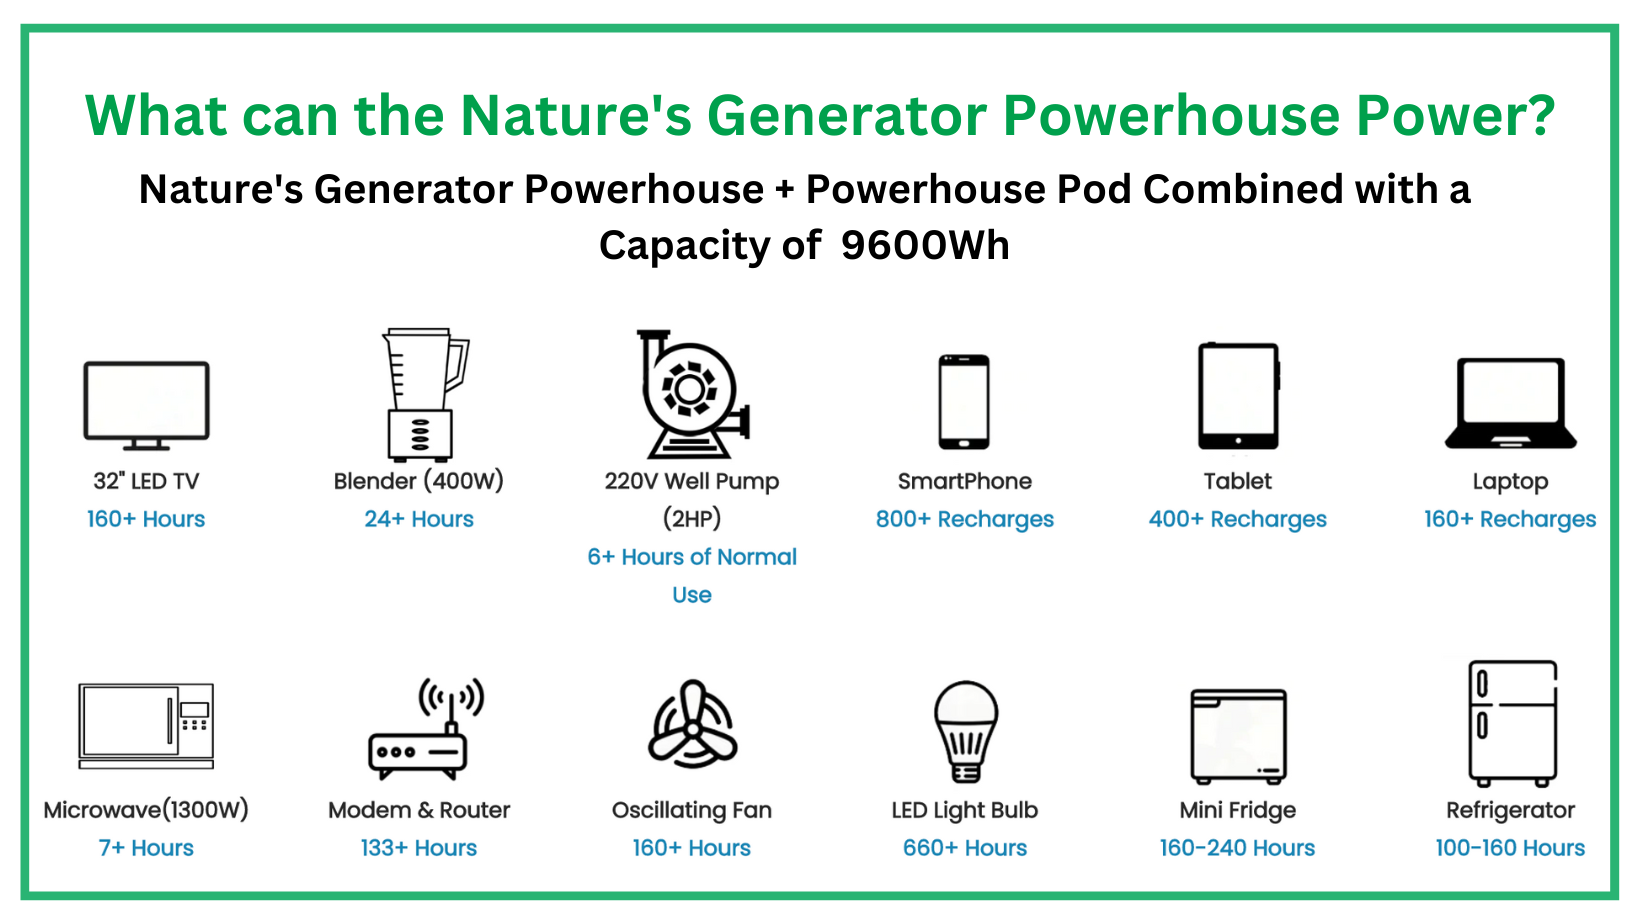 What can the Nature's Generator Powerhouse Power?